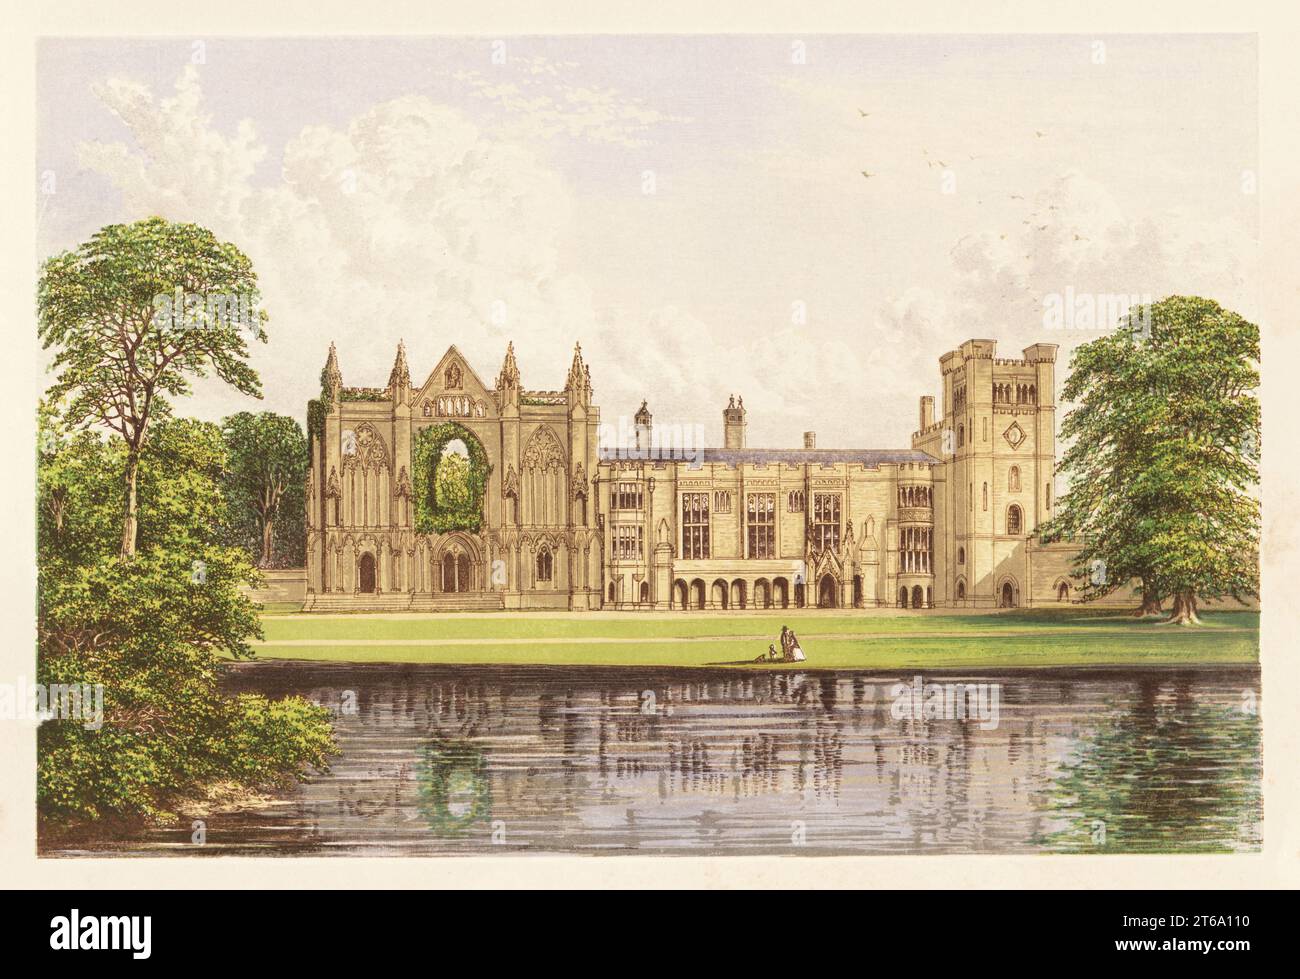 Newstead Abbey, Nottinghamshire, England. Medieval Augustinian priory granted to Sir John Byron by King Henry VIII at the Dissolution of the Monasteries. Formerly the home of poet George Gordon Byron, 6th Baron Byron. Bought in 1818 by Thomas Wildman, owner of 241 enslaved persons in Jamaica. Colour woodblock by Benjamin Fawcett in the Baxter process of an illustration by Alexander Francis Lydon from Reverend Francis Orpen Morriss Picturesque Views of the Seats of Noblemen and Gentlemen of Great Britain and Ireland, William Mackenzie, London, 1880. Stock Photo